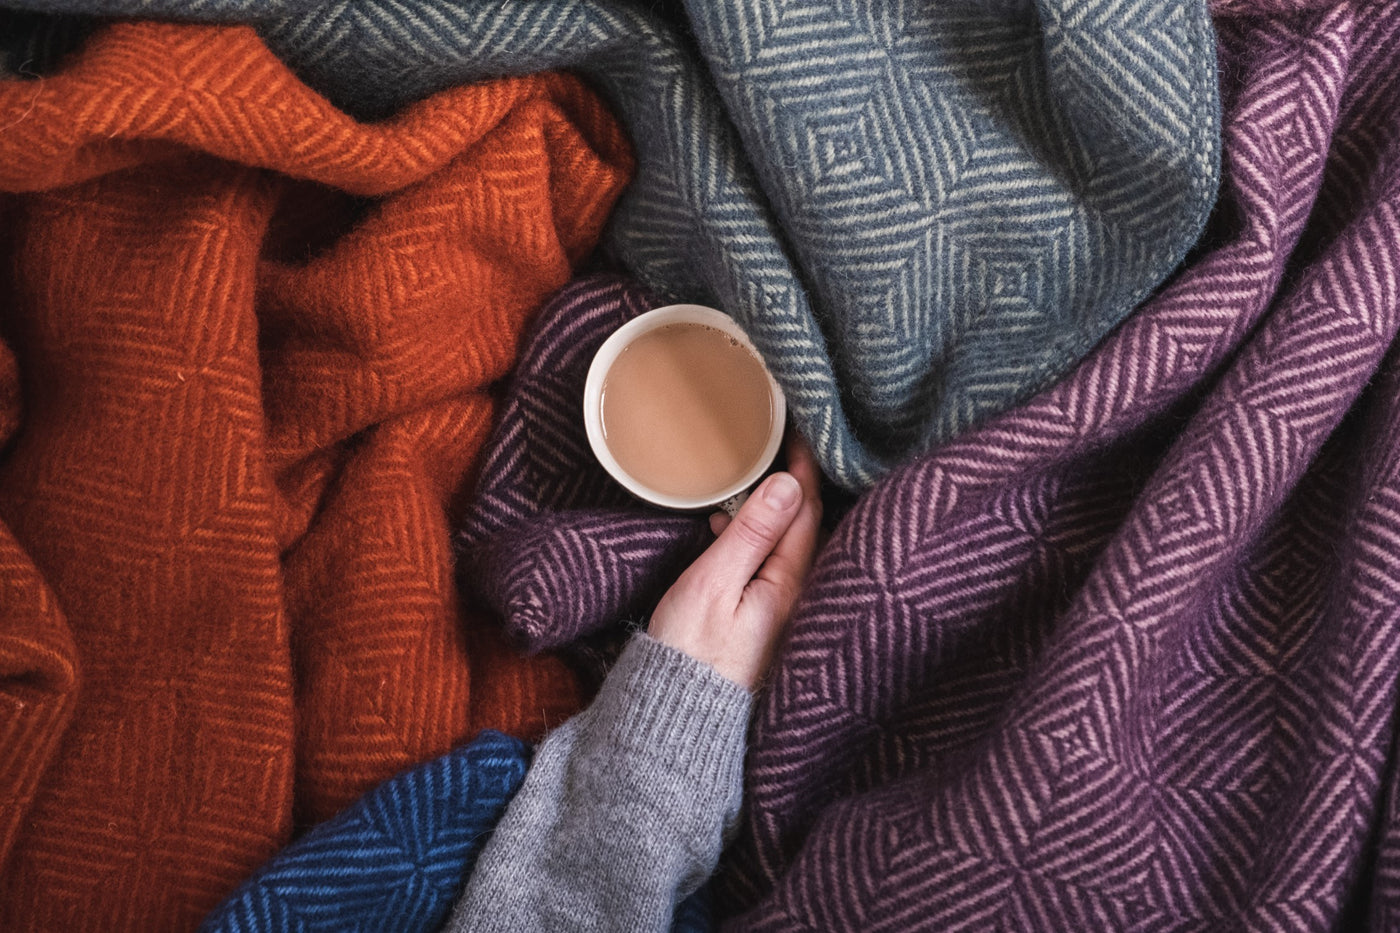 A cup of tea being held in the middle of a pile of wool blankets